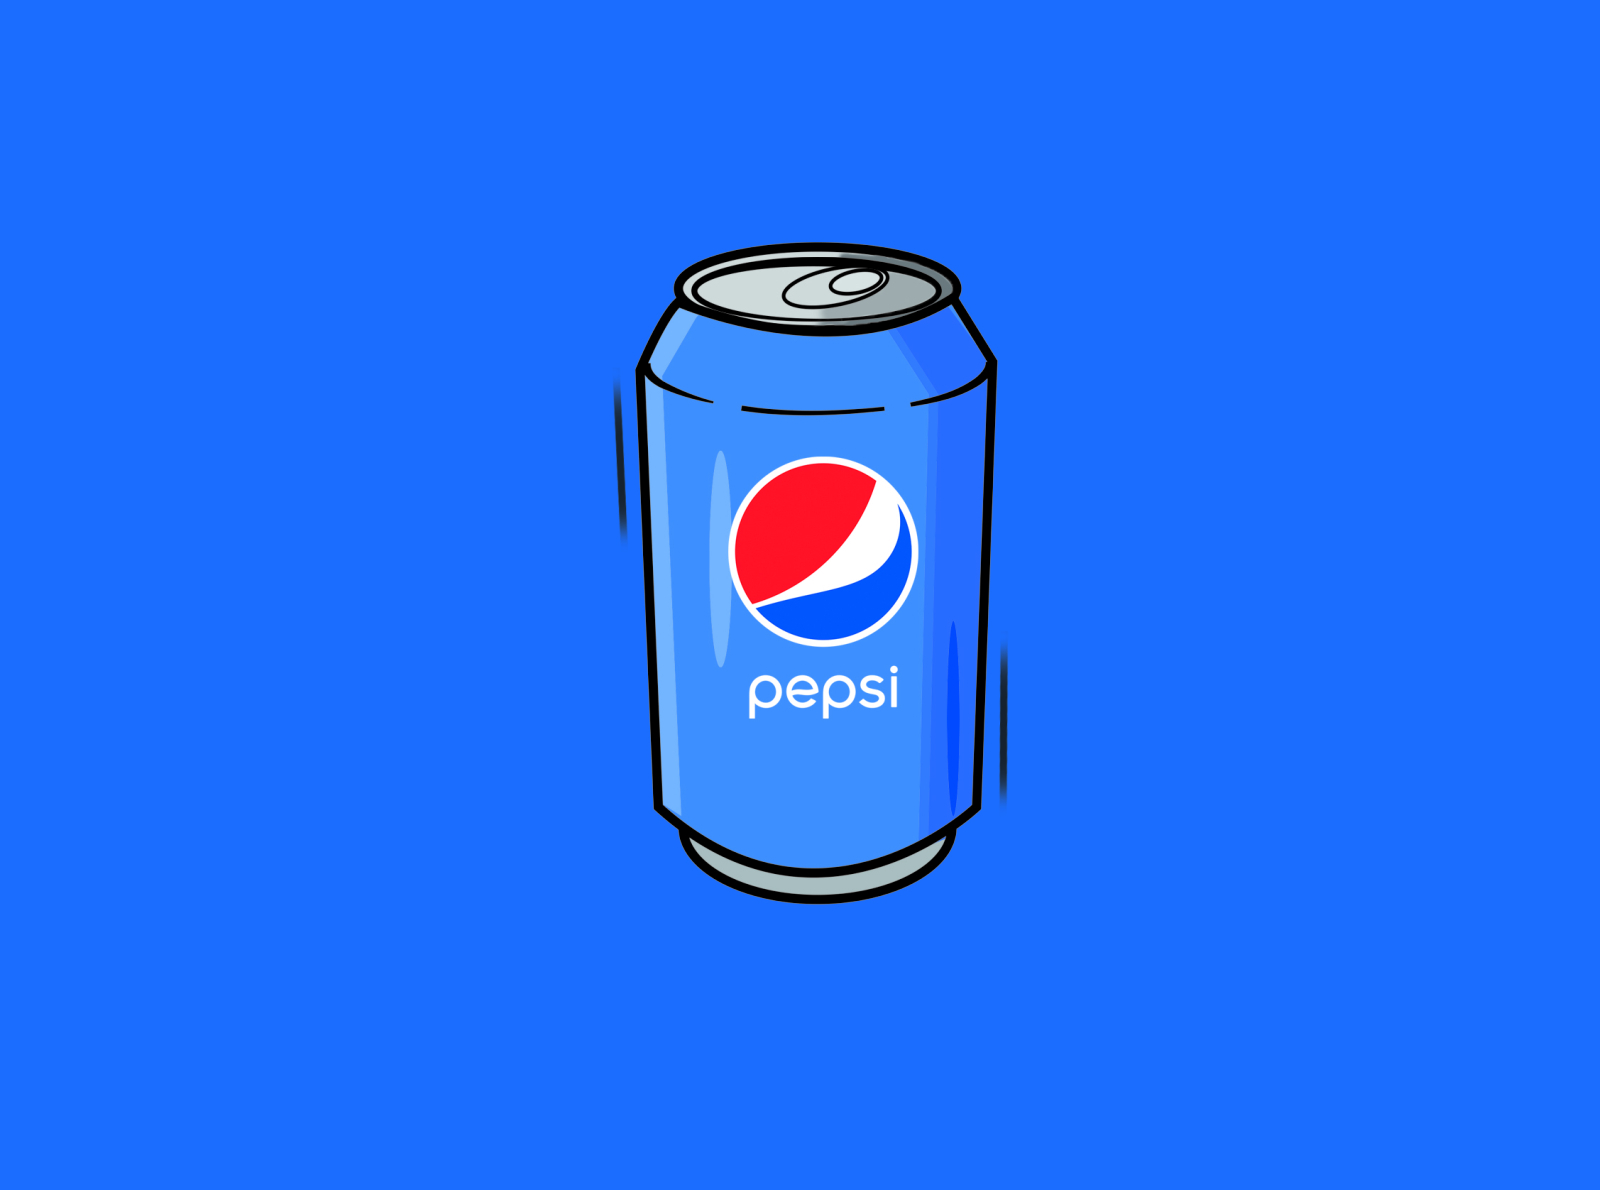 Illustrated Pepsi Can by Muthu Kumar on Dribbble